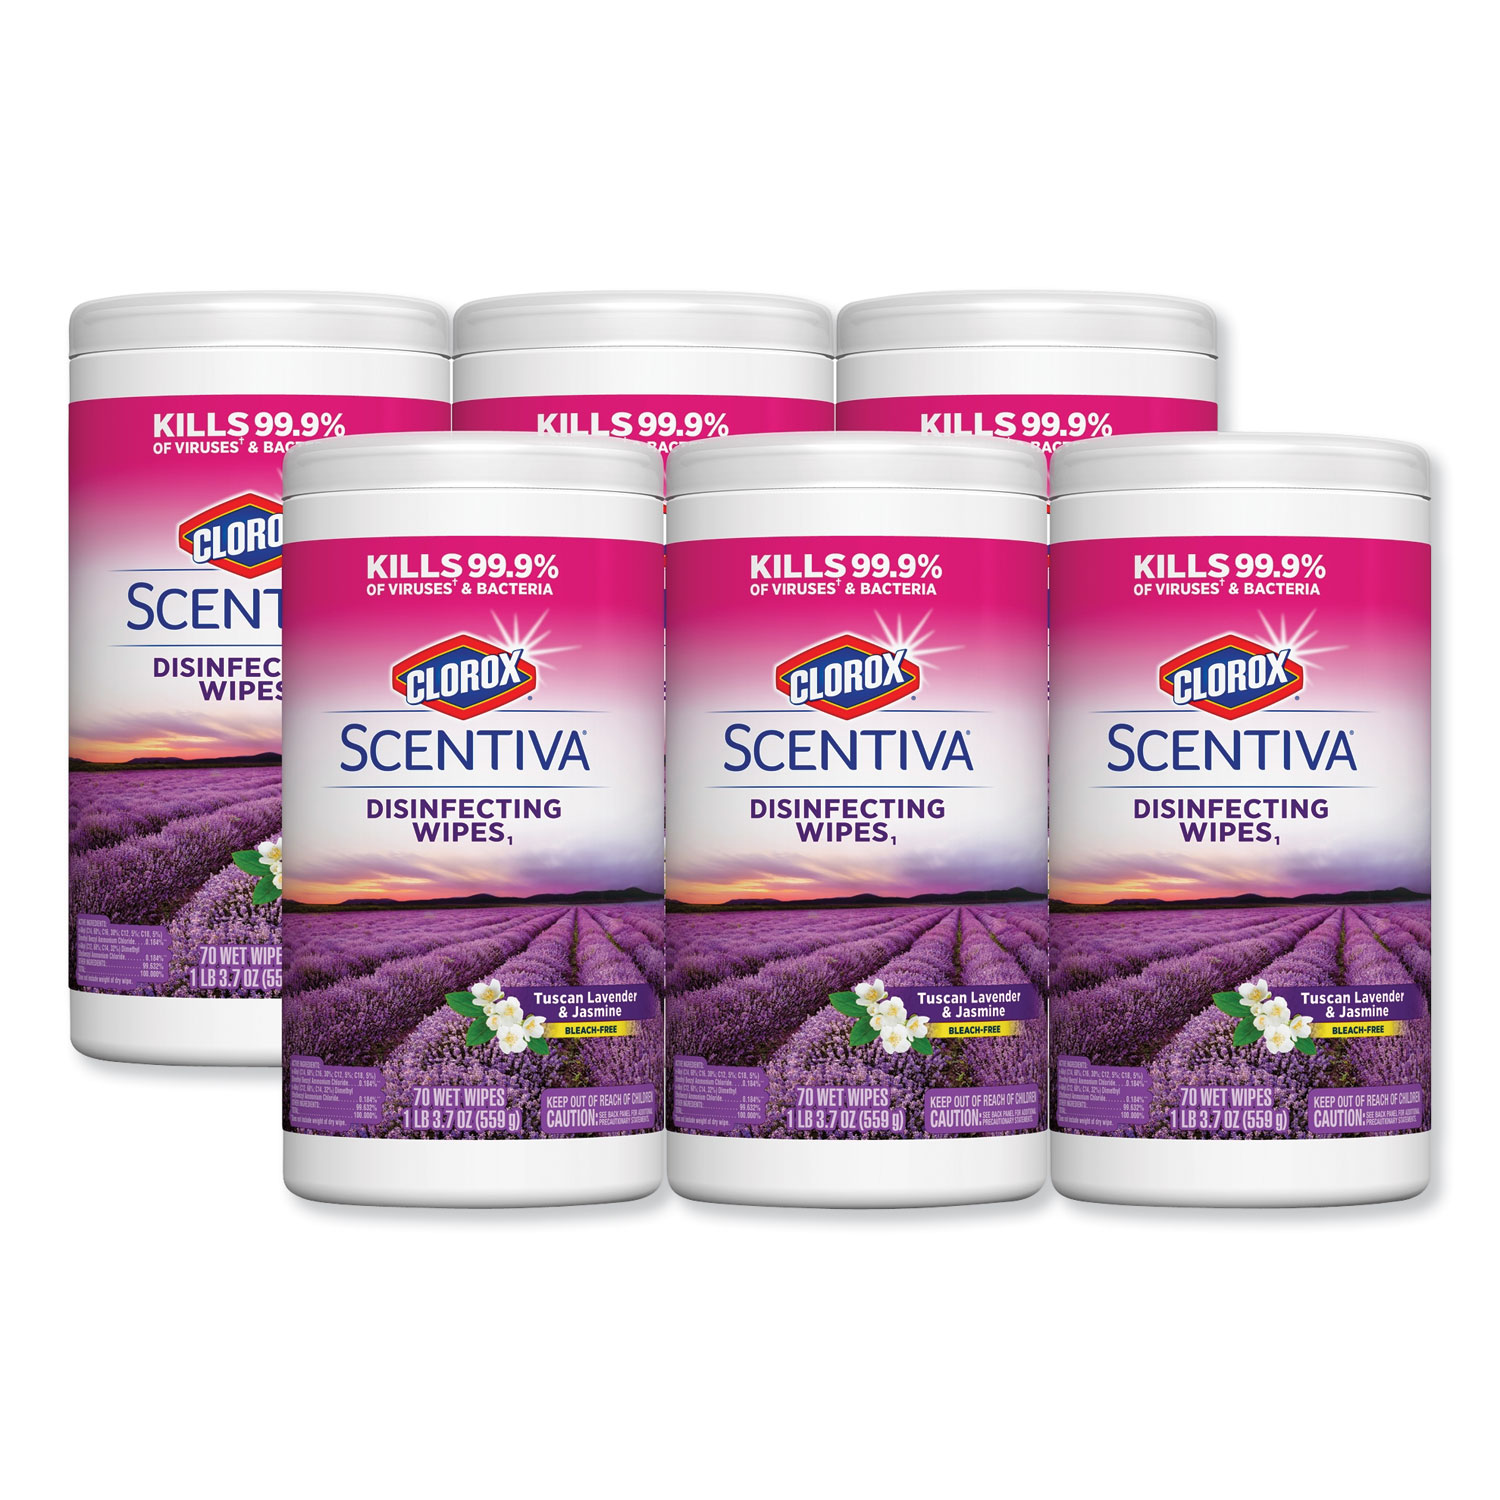  Clorox 31629 Scentiva Disinfecting Wipes, Tuscan Lavender and Jasmine, 7 x 8, 70/Can, 6/CT (CLO31629) 